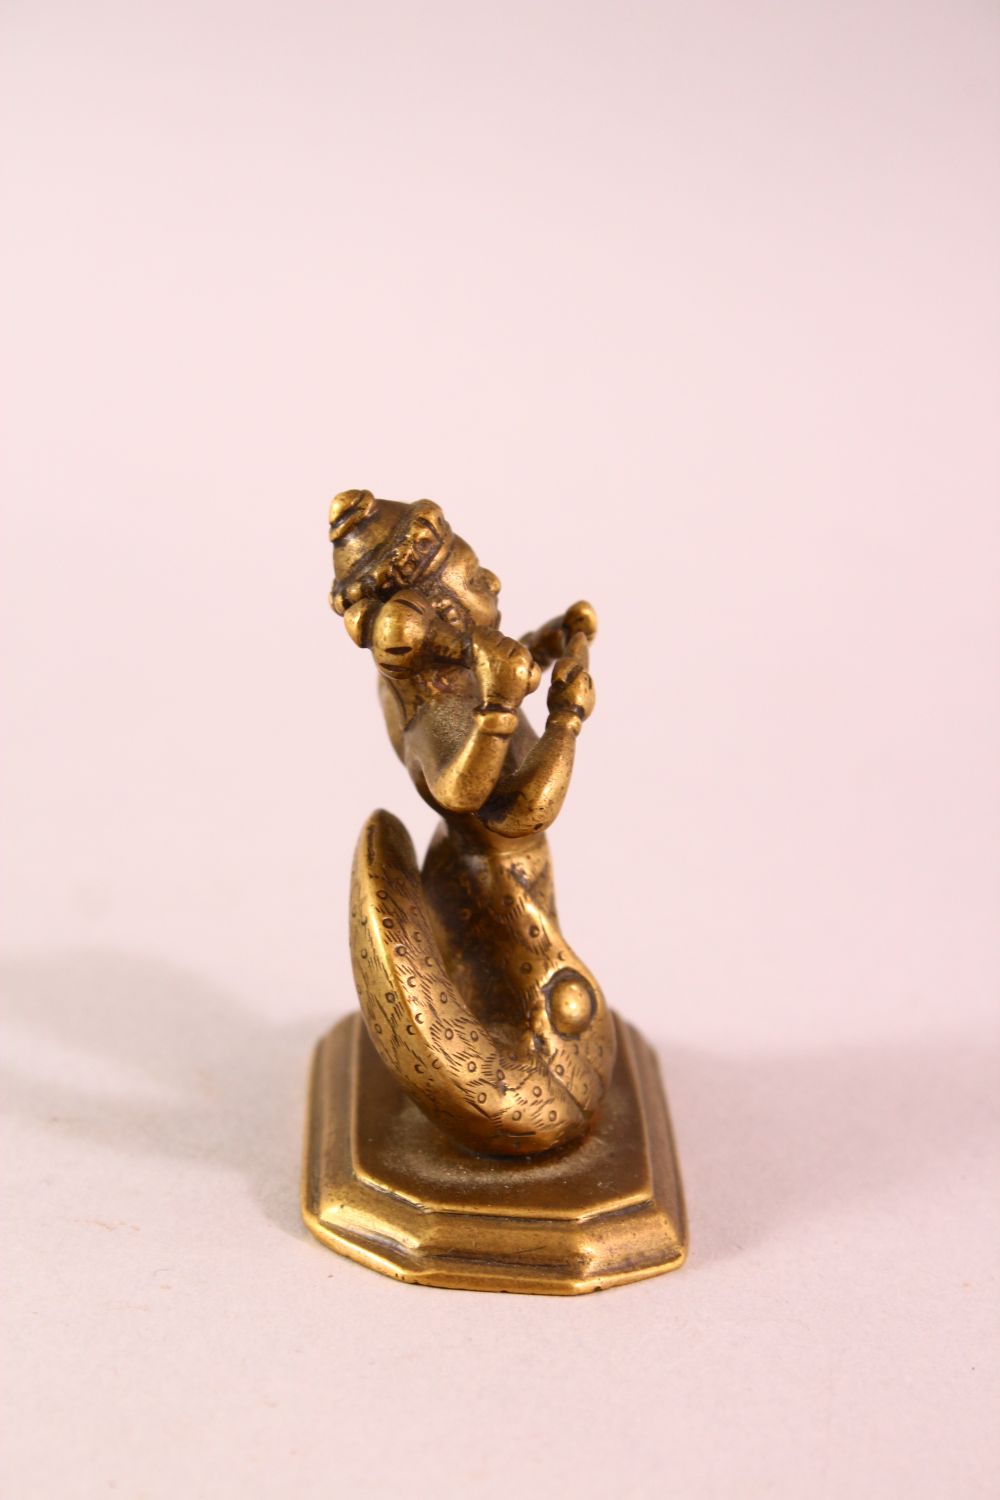 A SMALL GOOD QUALITY 19TH CENTURY BRONZE FIGURE OF MATSYA, multi arms holding objects, fish attached - Image 2 of 5